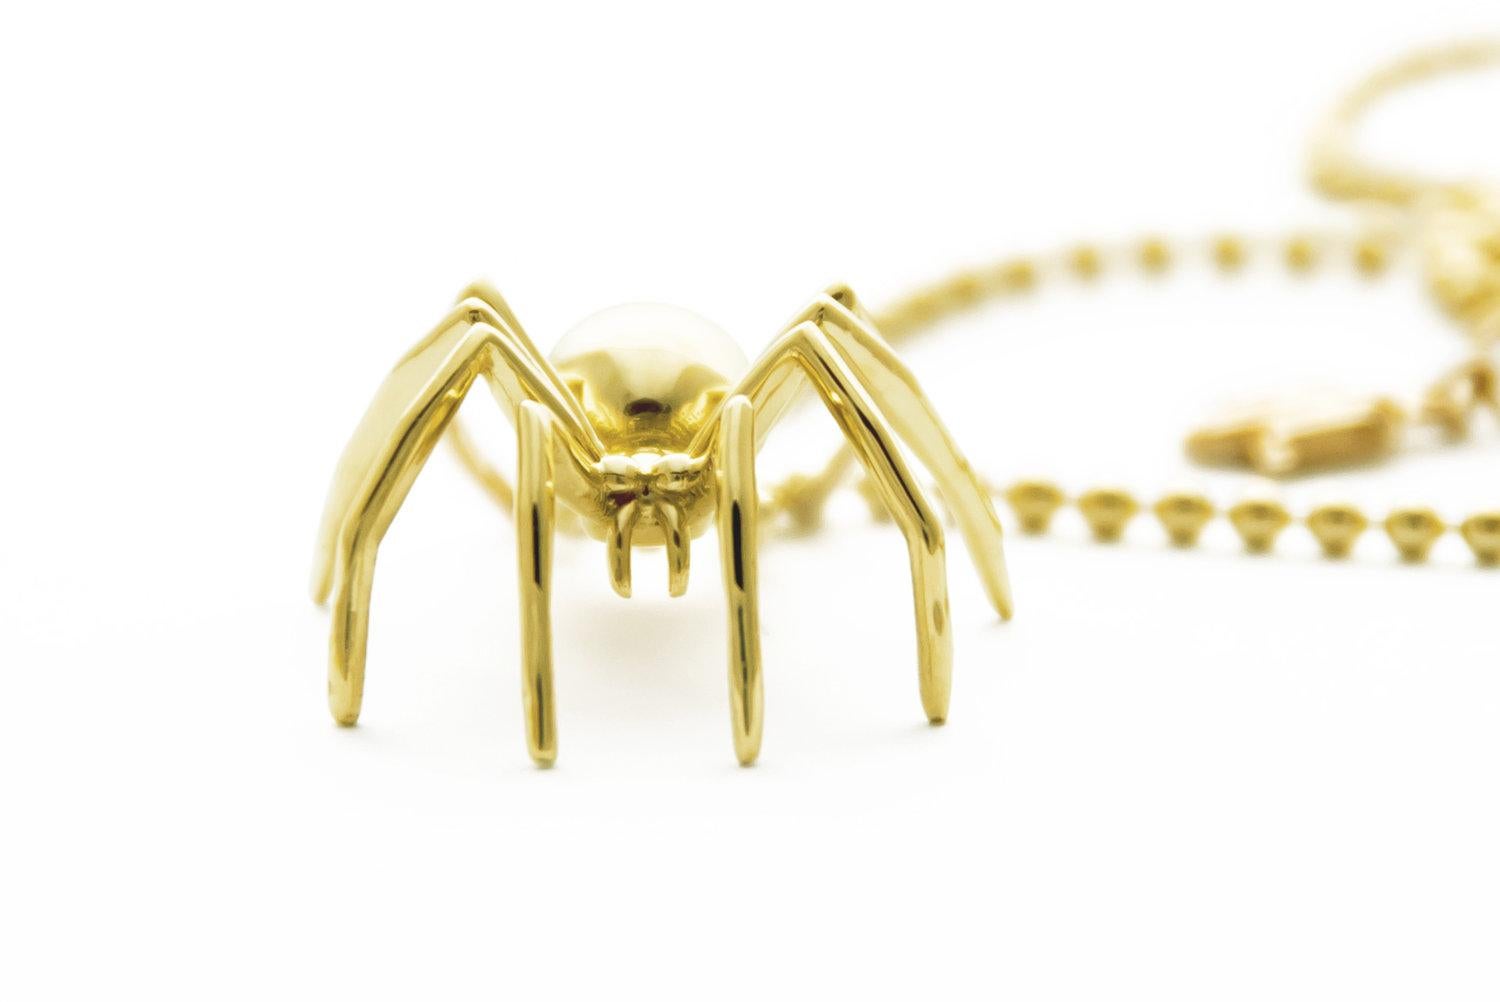 The spider has long been a symbol of creativity and is seen as the master of it's own destiny.

SP303PD YG

14k solid yellow gold

The Spider is 23mm x 17mm

15